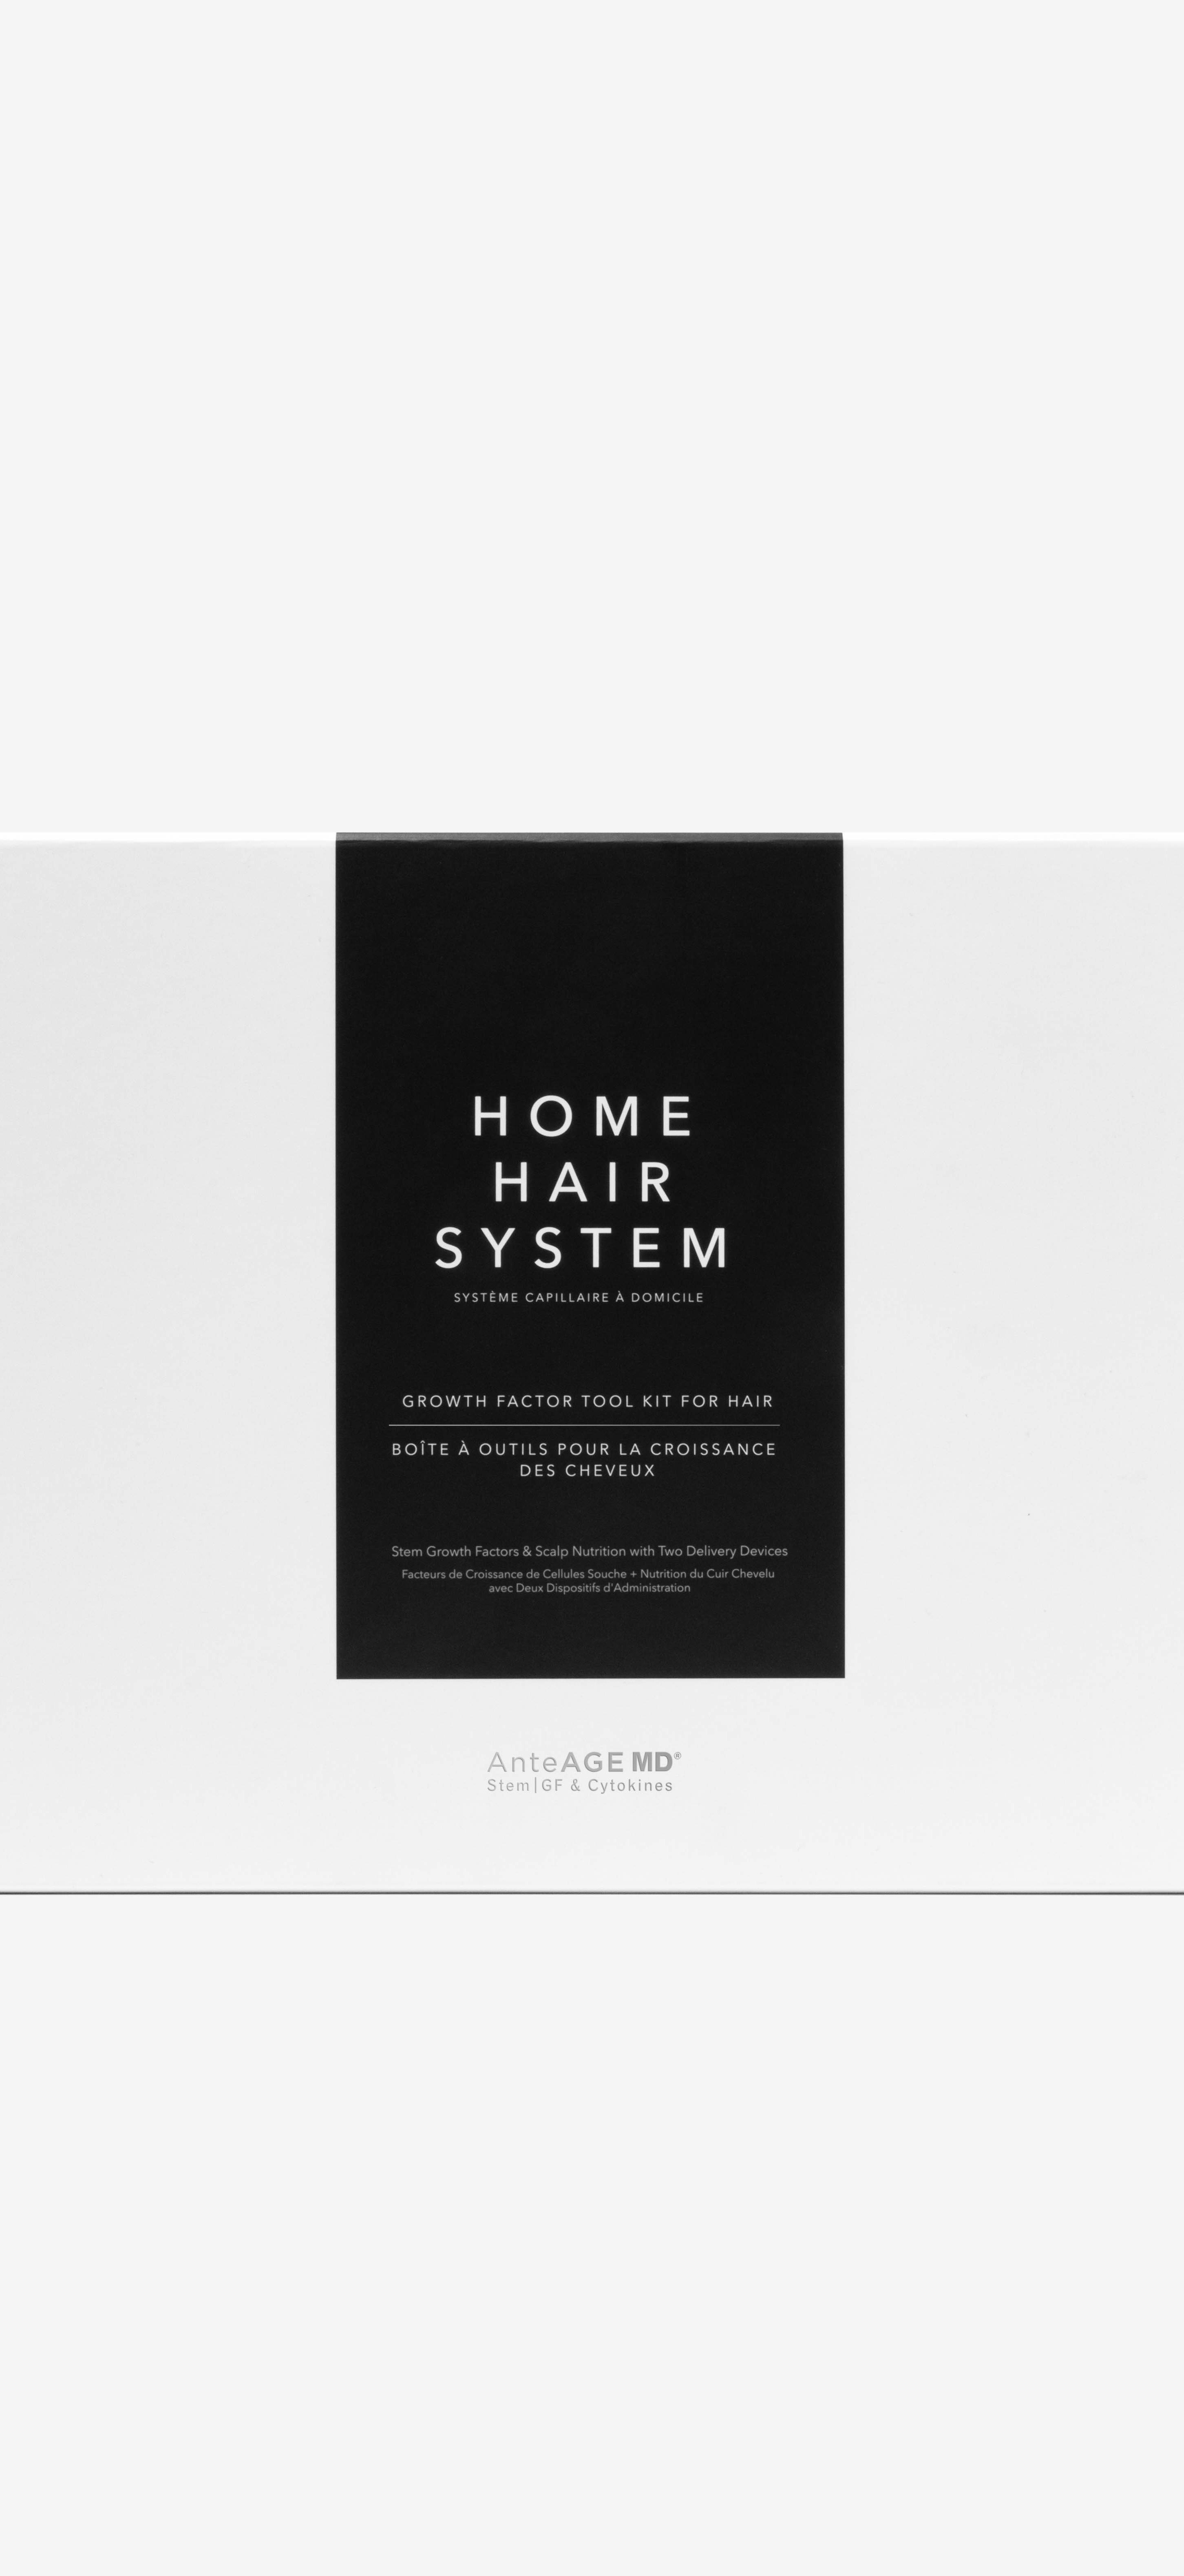 Home Hair System by Anteage